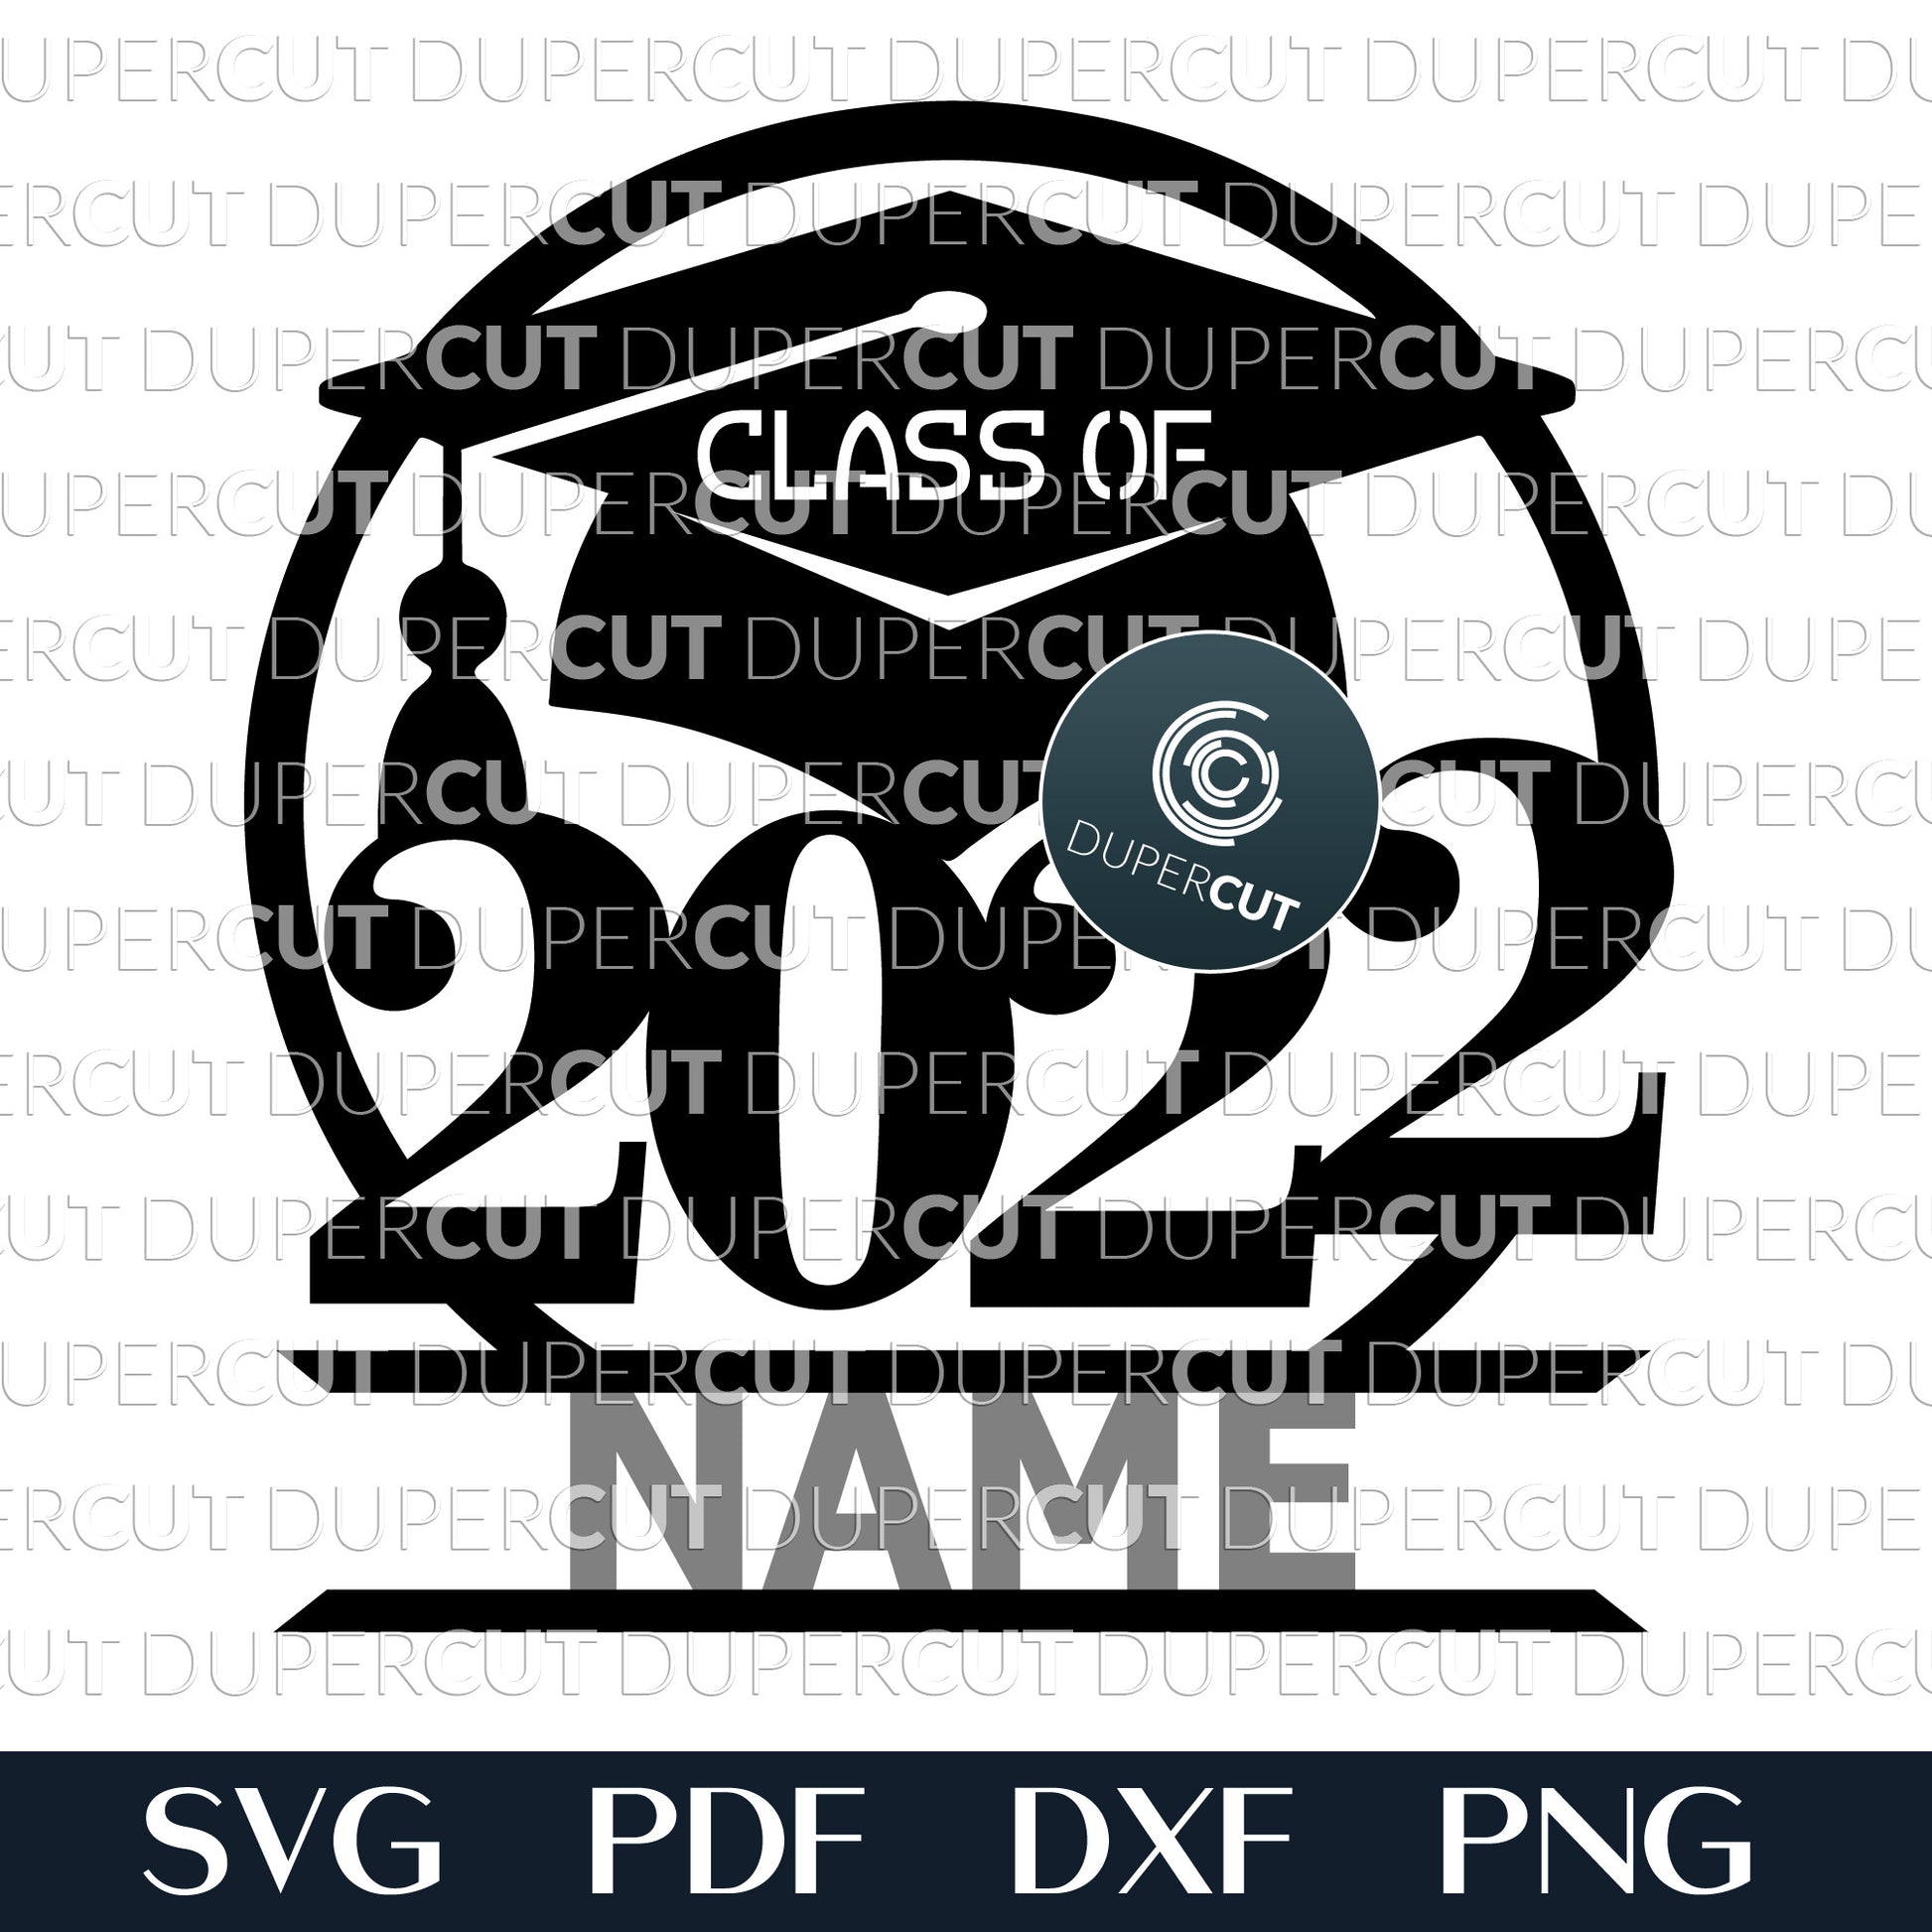 Class of 2022 - personalized graduation template  - SVG, EPS files for laser cutting with Glowforge, Cricut, Silhouette Cameo, CNC plasma machines by DuperCut